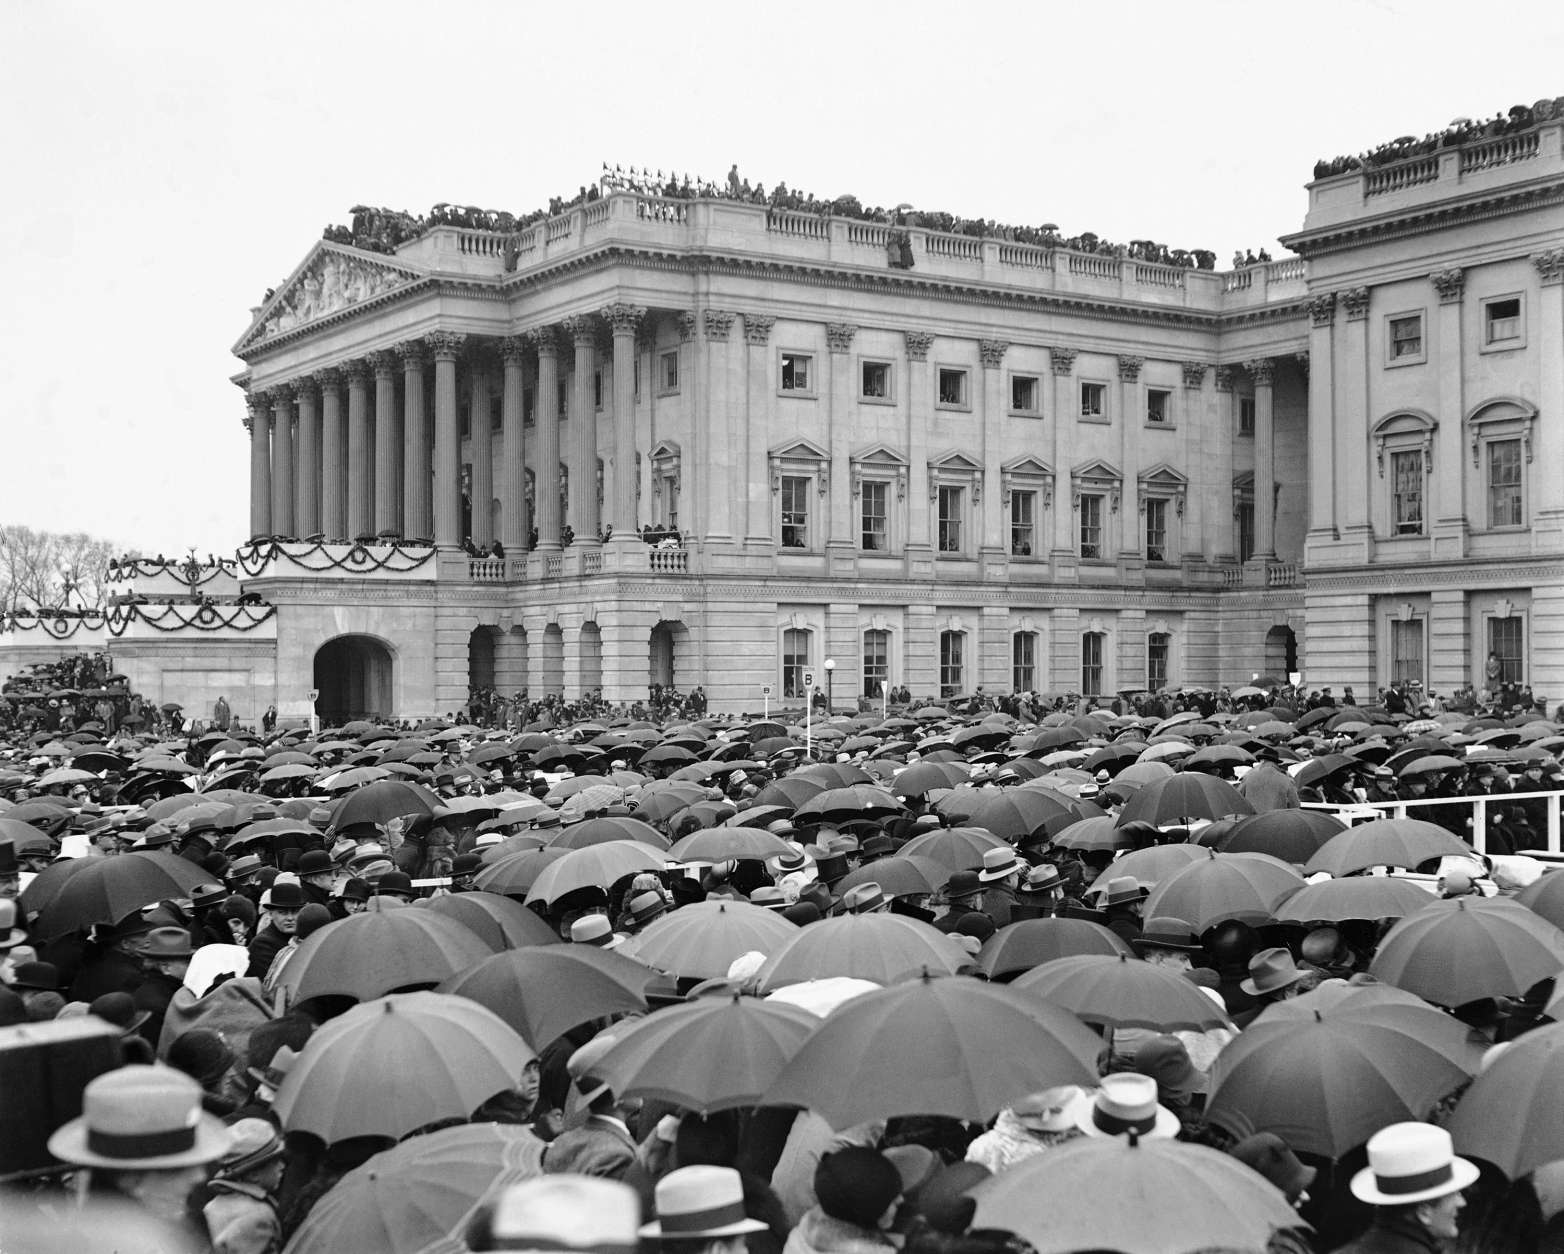 Crowds stand in the rain as they witness the inauguration of Herbert Hoover in Washington, D.C., March 4, 1929.  (AP Photo)